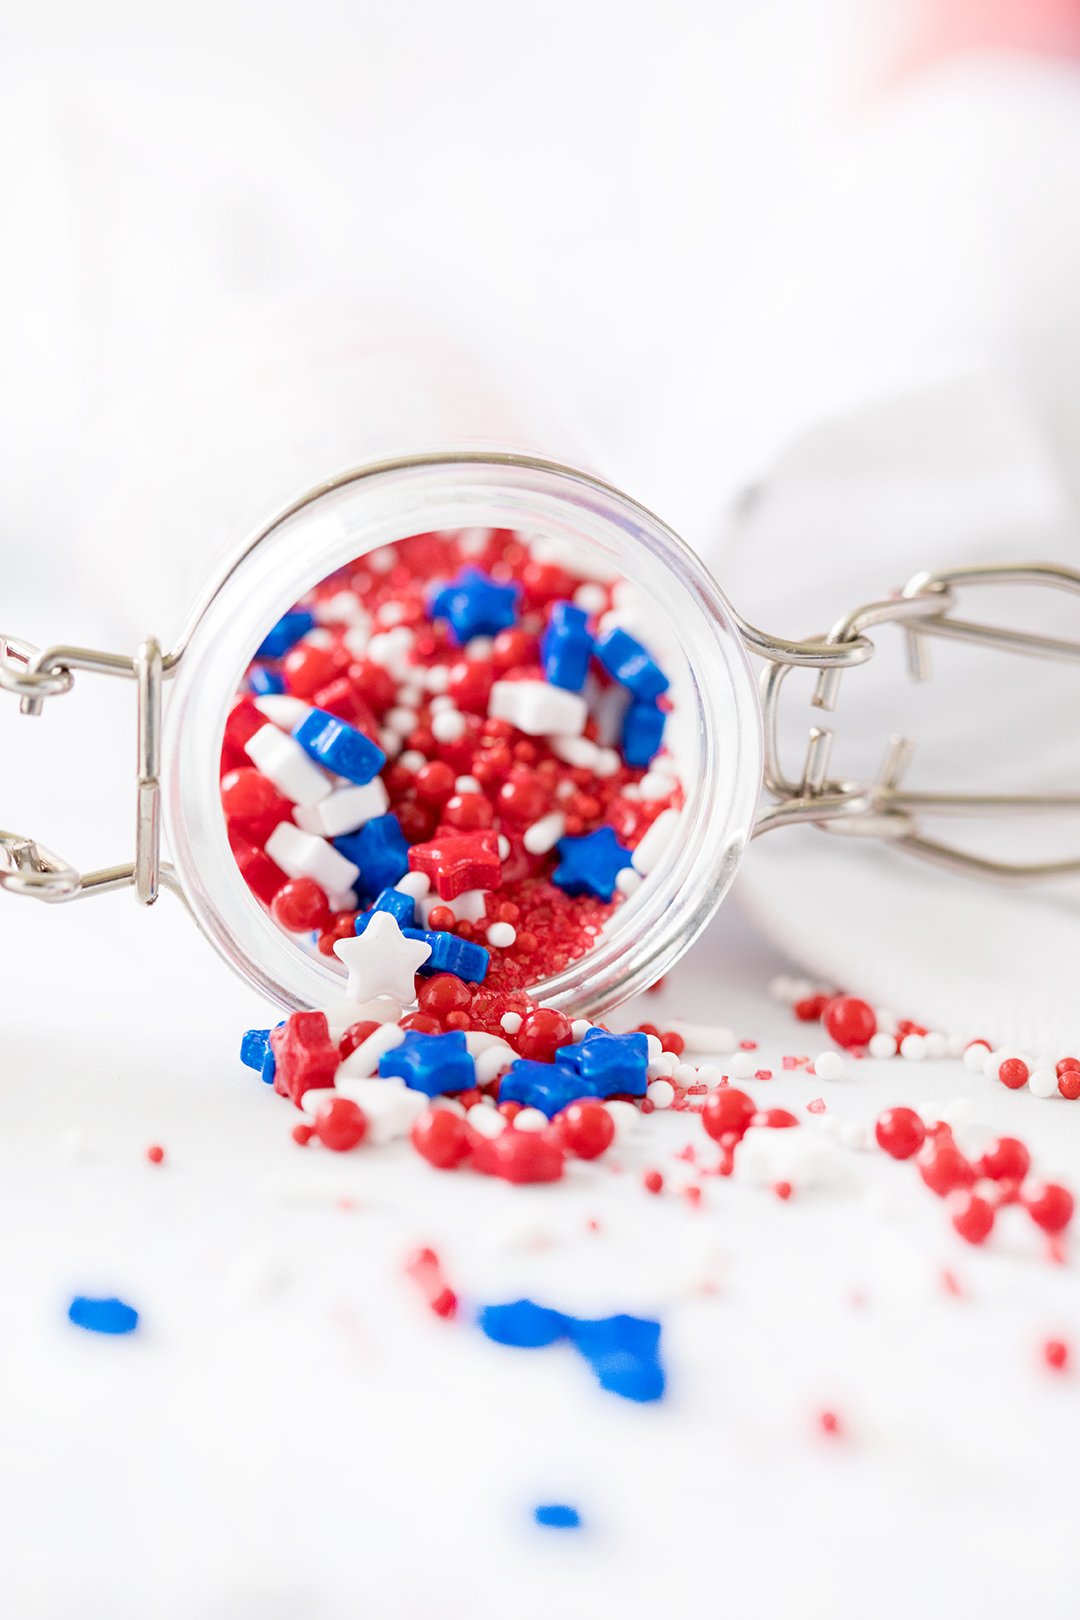 patriotic sprinkles. red, white and blue with stars.